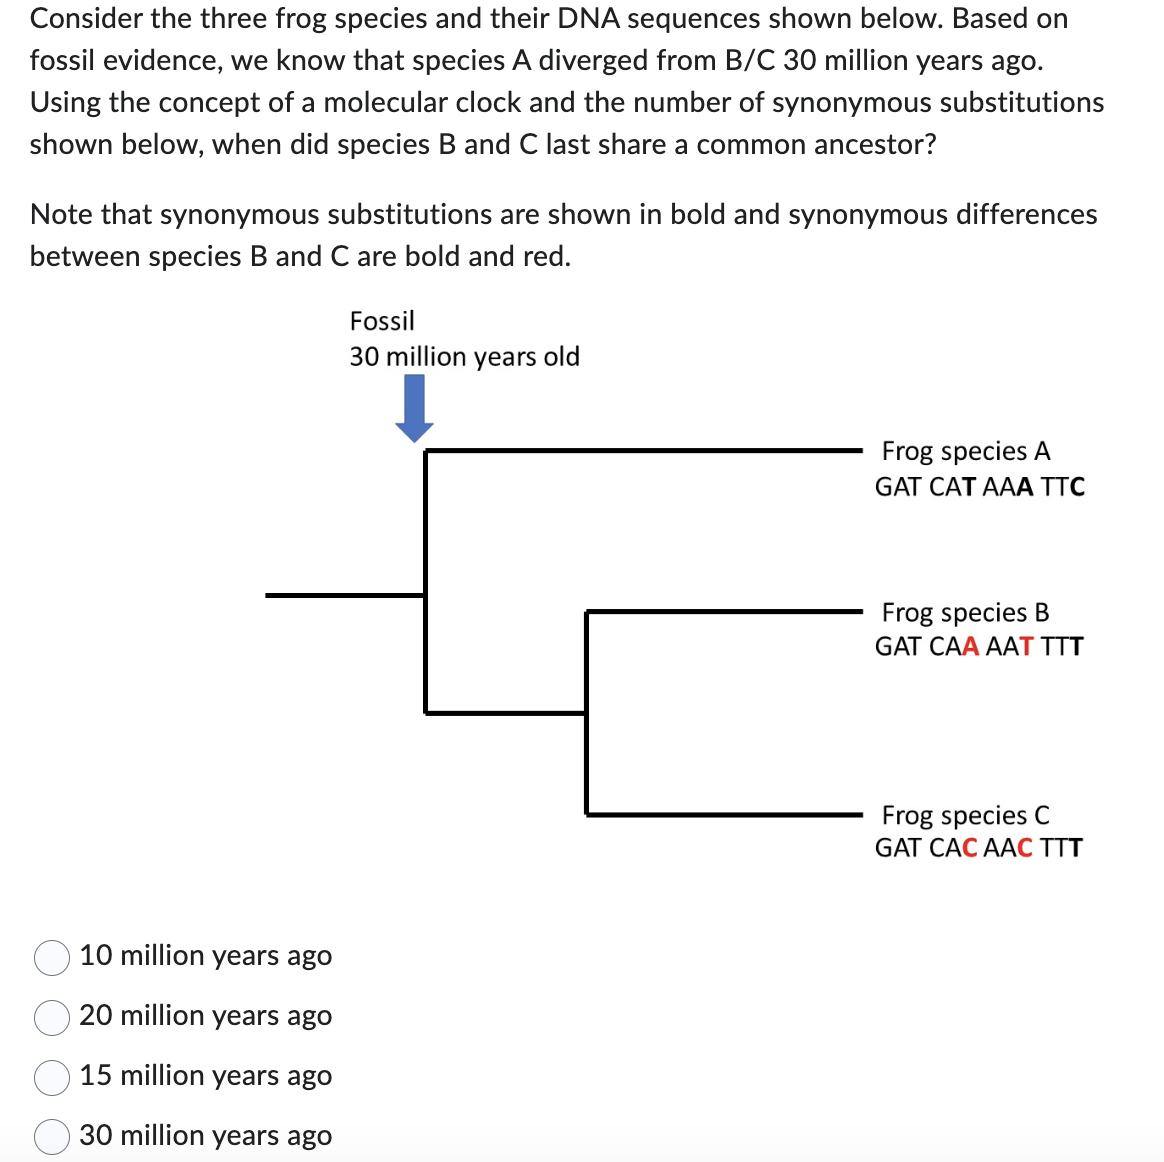 Consider the three frog species and their DNA sequences shown below. Based on
fossil evidence, we know that species A diverged from B/C 30 million years ago.
Using the concept of a molecular clock and the number of synonymous substitutions
shown below, when did species B and C last share a common ancestor?
Note that synonymous substitutions are shown in bold and synonymous differences
between species B and C are bold and red.
10 million years ago
20 million years ago
15 million years ago
30 million years ago
Fossil
30 million years old
Frog species A
GAT CAT AAA TTC
Frog species B
GAT CAA AAT TTT
Frog species C
GAT CAC AAC TTT